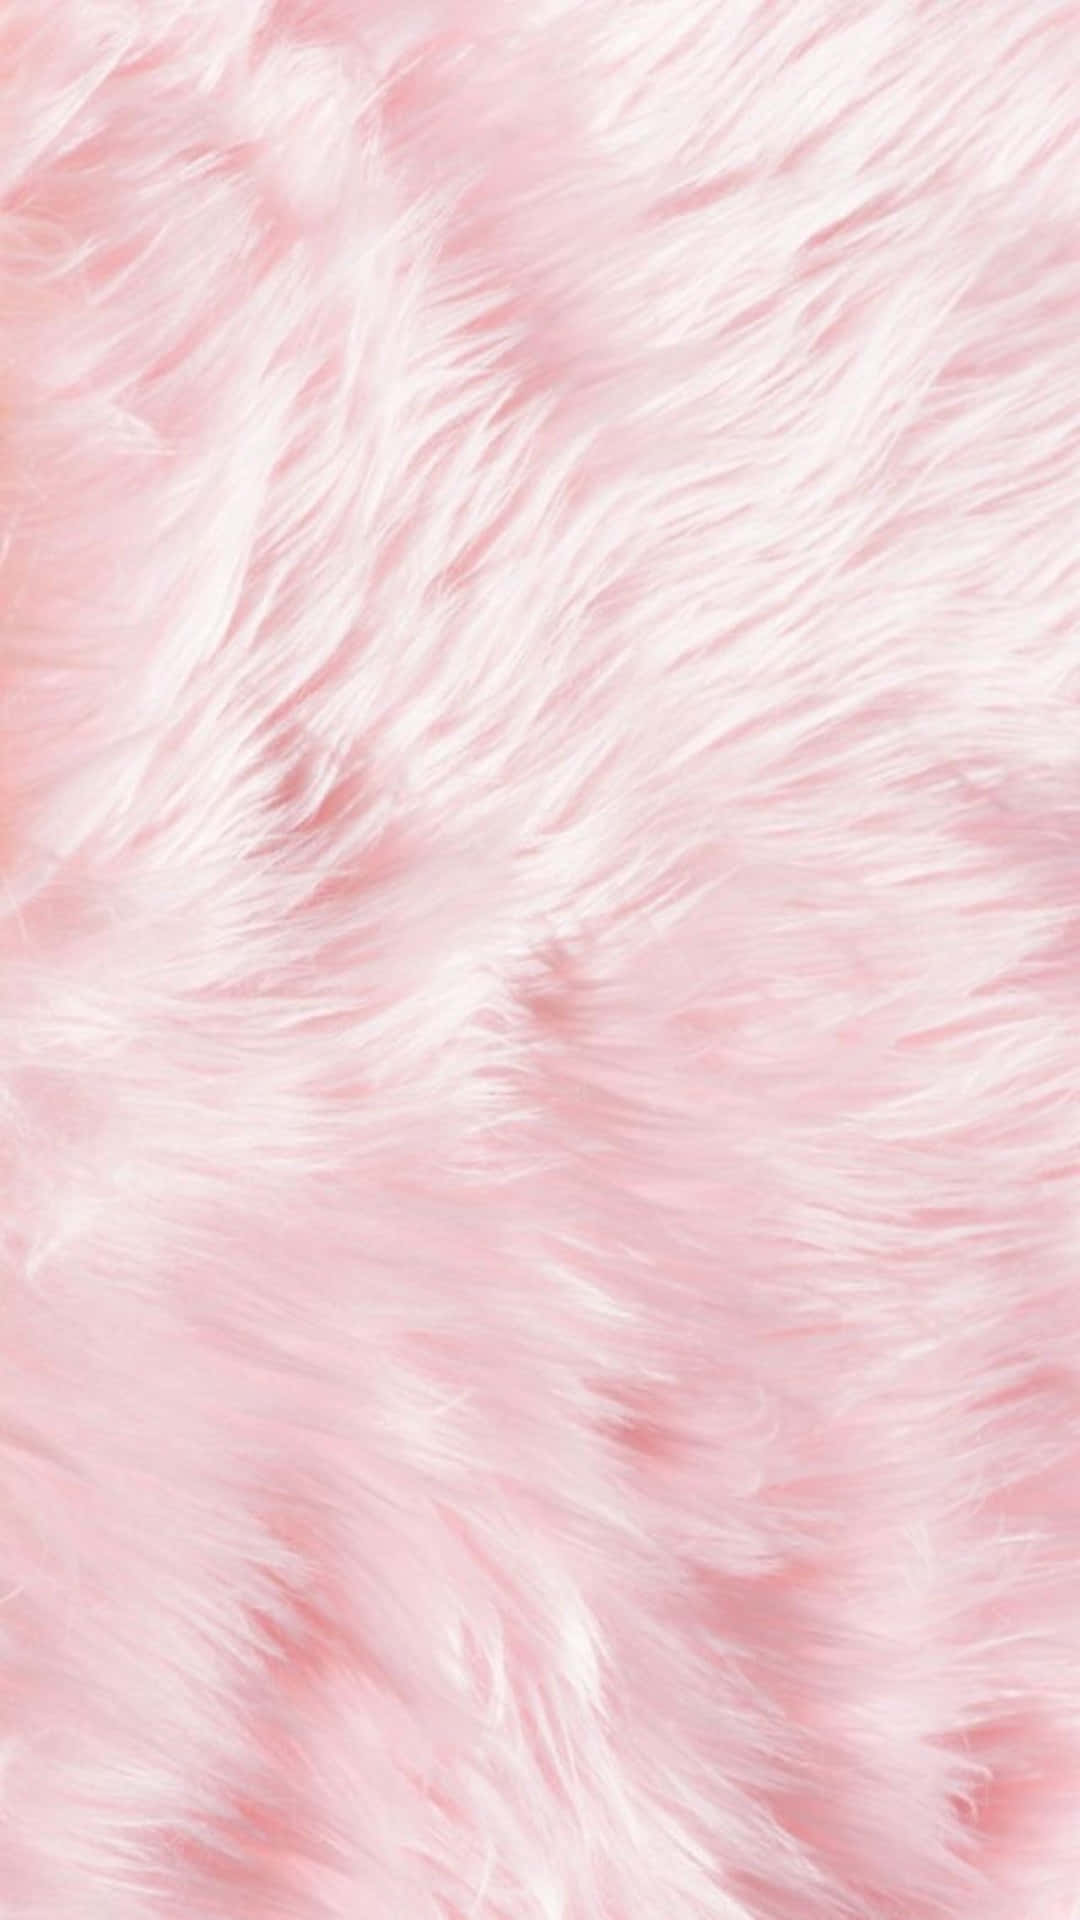 Get your hands on the latest Light Pink IPhone Wallpaper